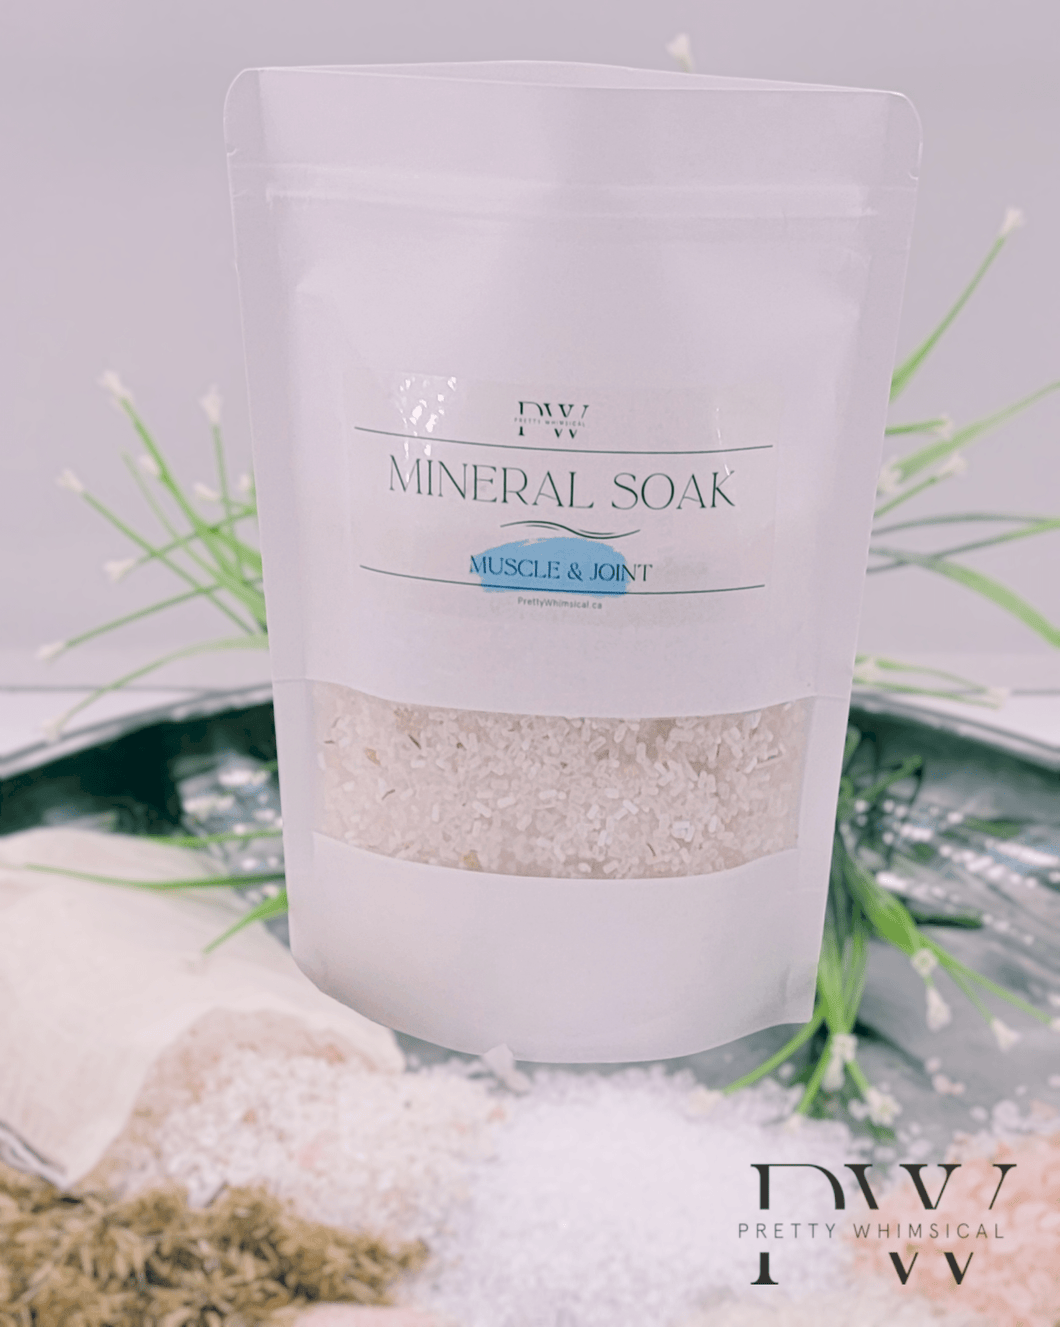 Muscle & Joint Mineral Soak Pretty Whimsical